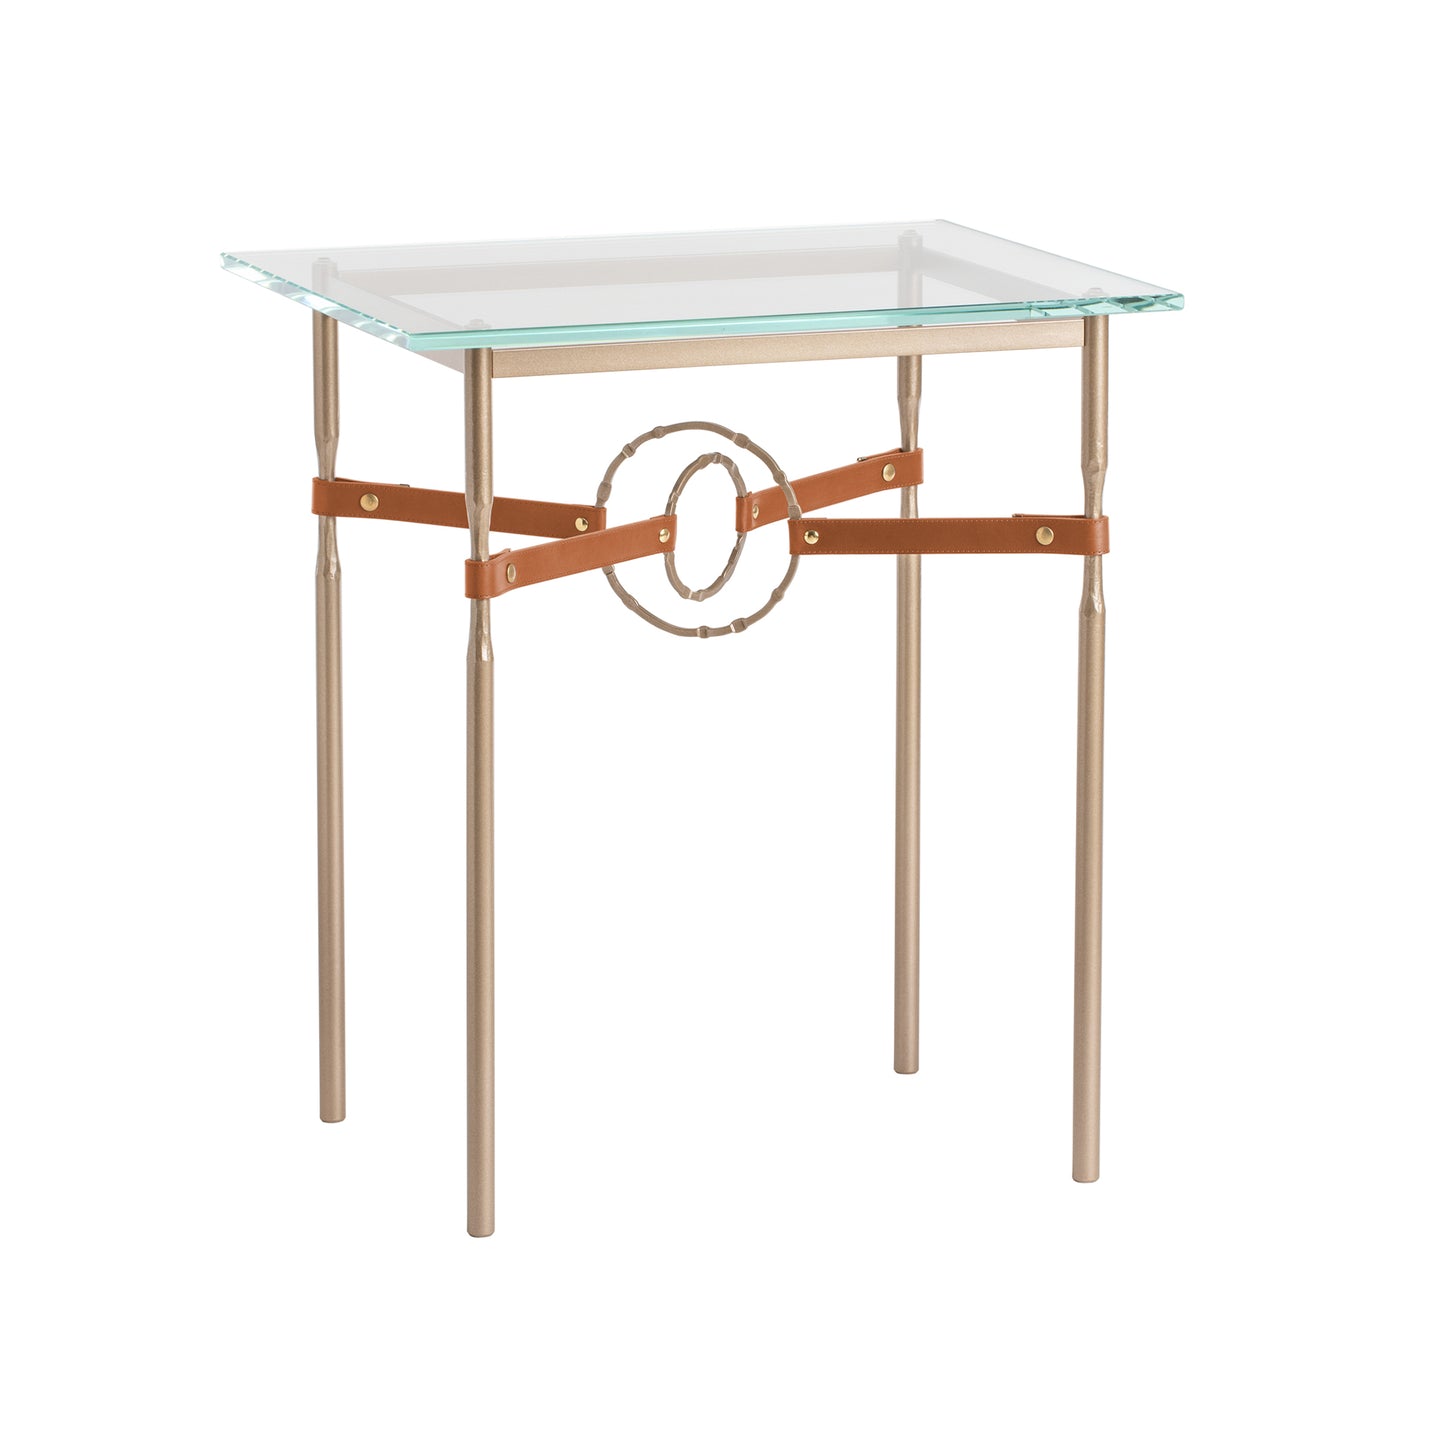 The Hubbardton Forge Equus Side Table is a modern and sleek end table, featuring a stylish glass top supported by sturdy metal legs.